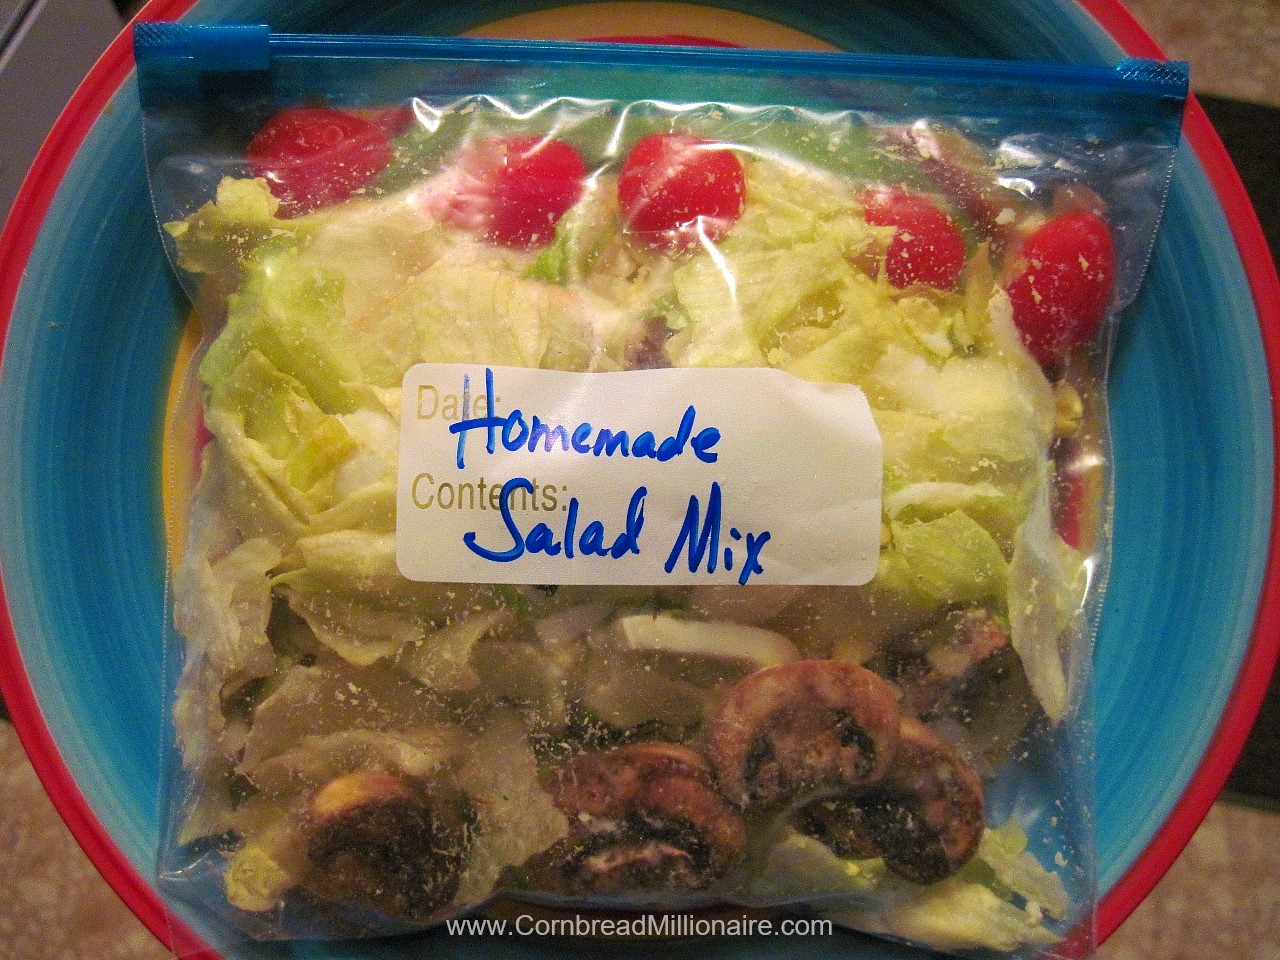 Homemade Salad Mix in a Bag UPDATED